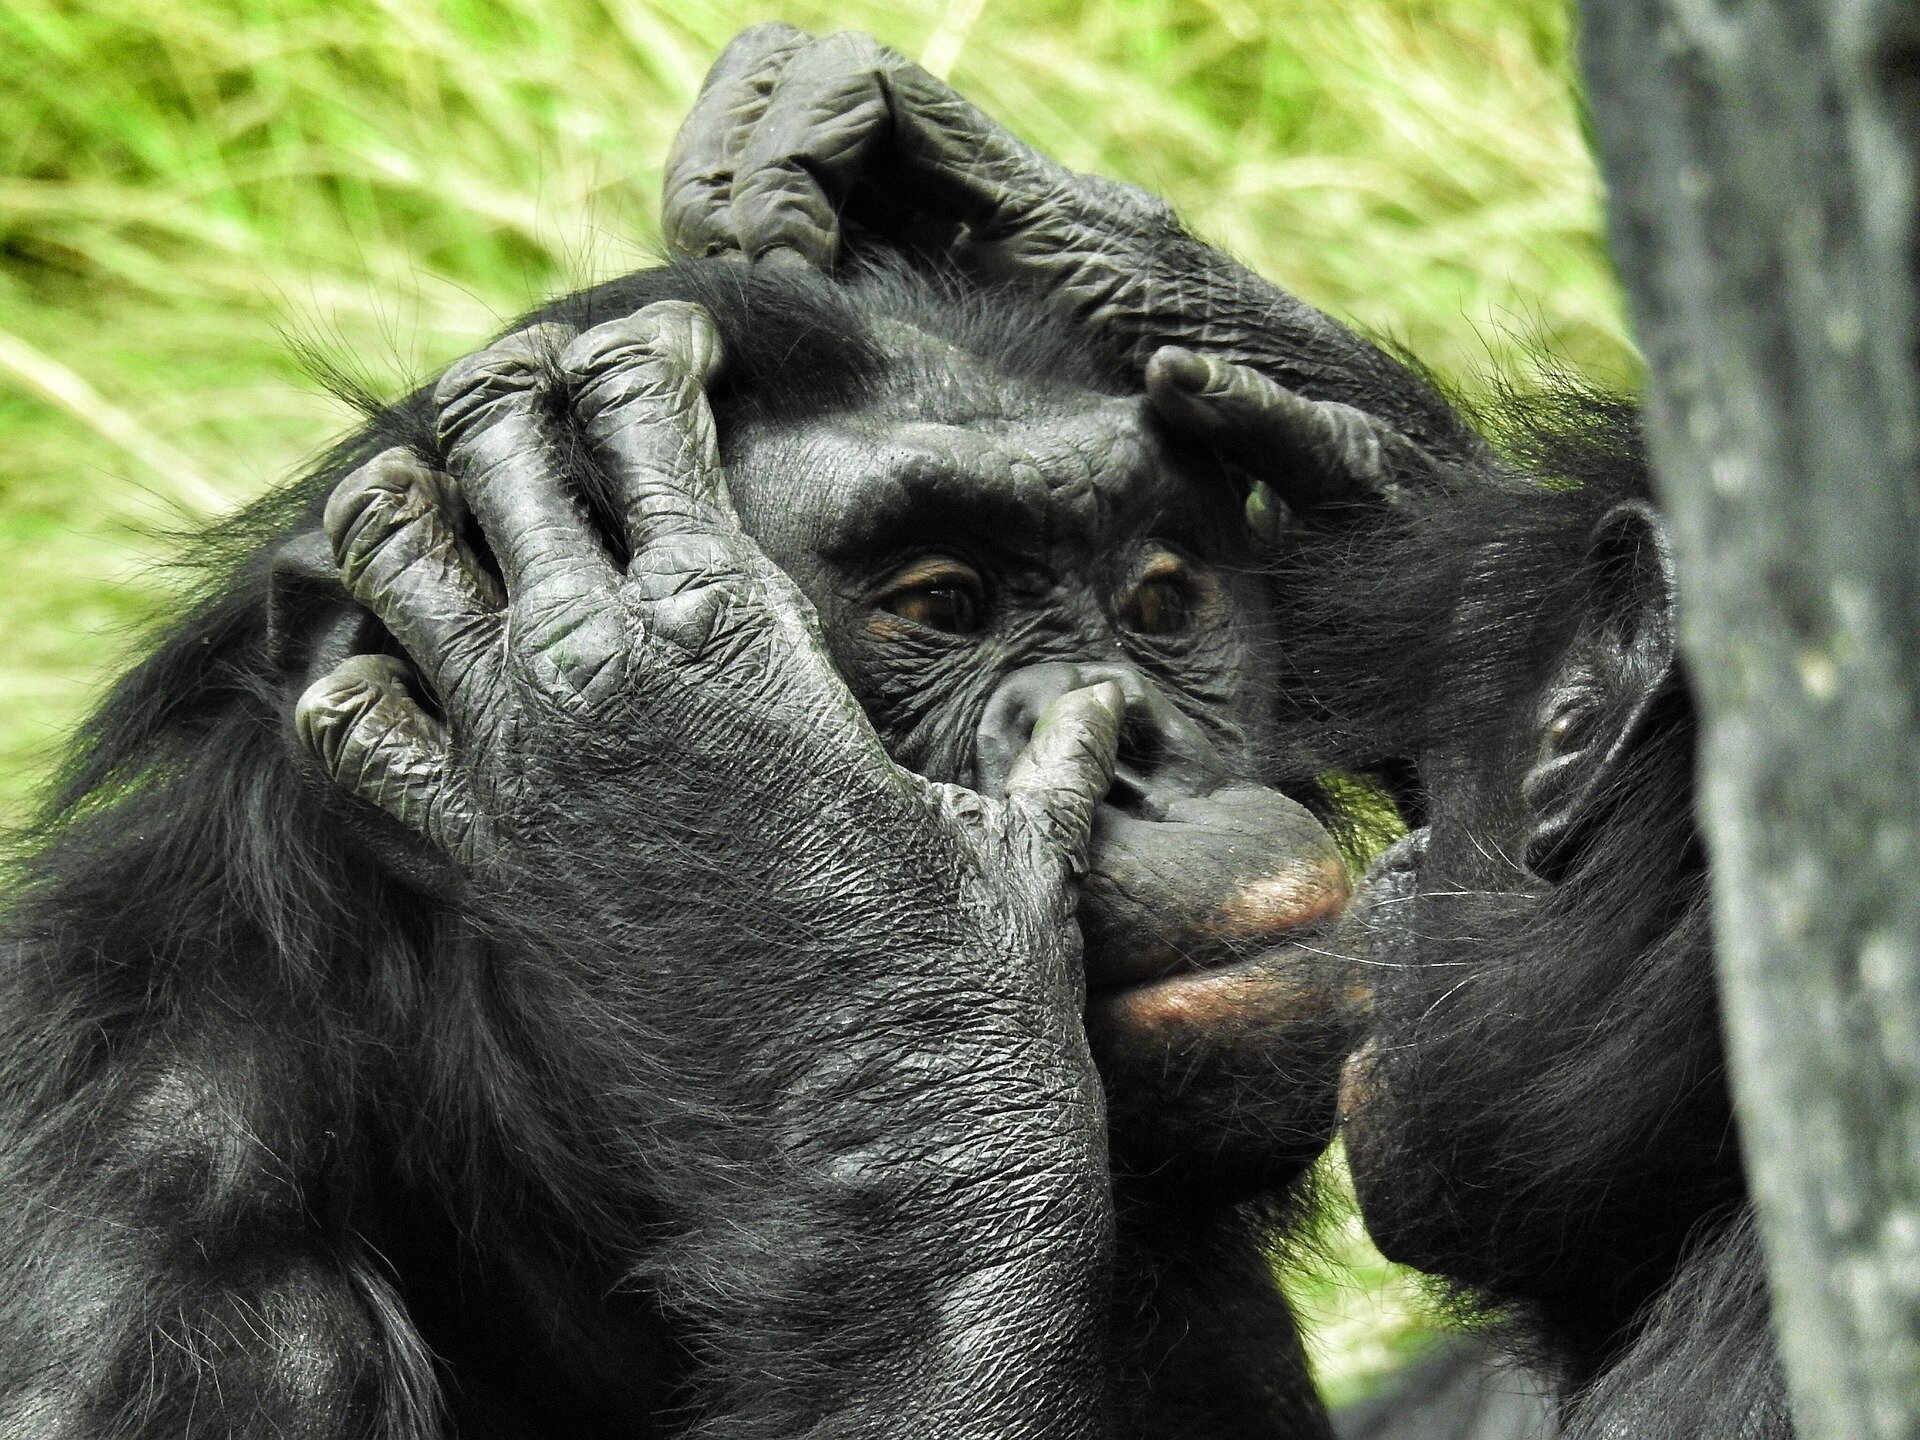 Bonobos, unlike humans, are more interested in the emotions of strangers  than individuals they know